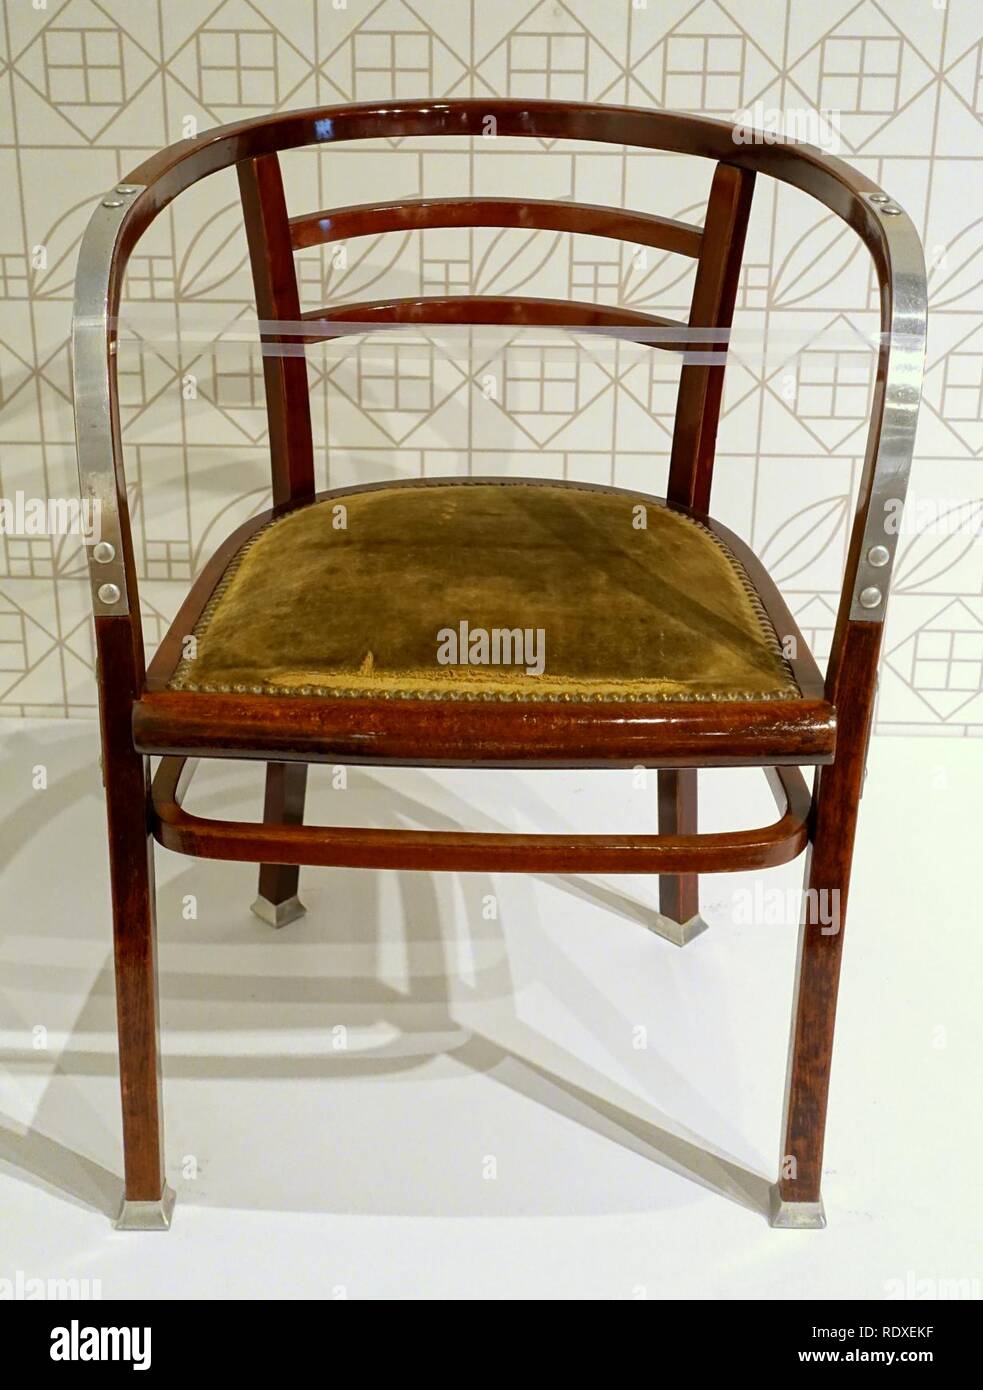 Armchair model 718 F, Otto Wagner, Vienna, made by Gebruder Thonet, c. 1905-1906, beechwood, aluminum, caning under upholstery - Montreal Stock Photo